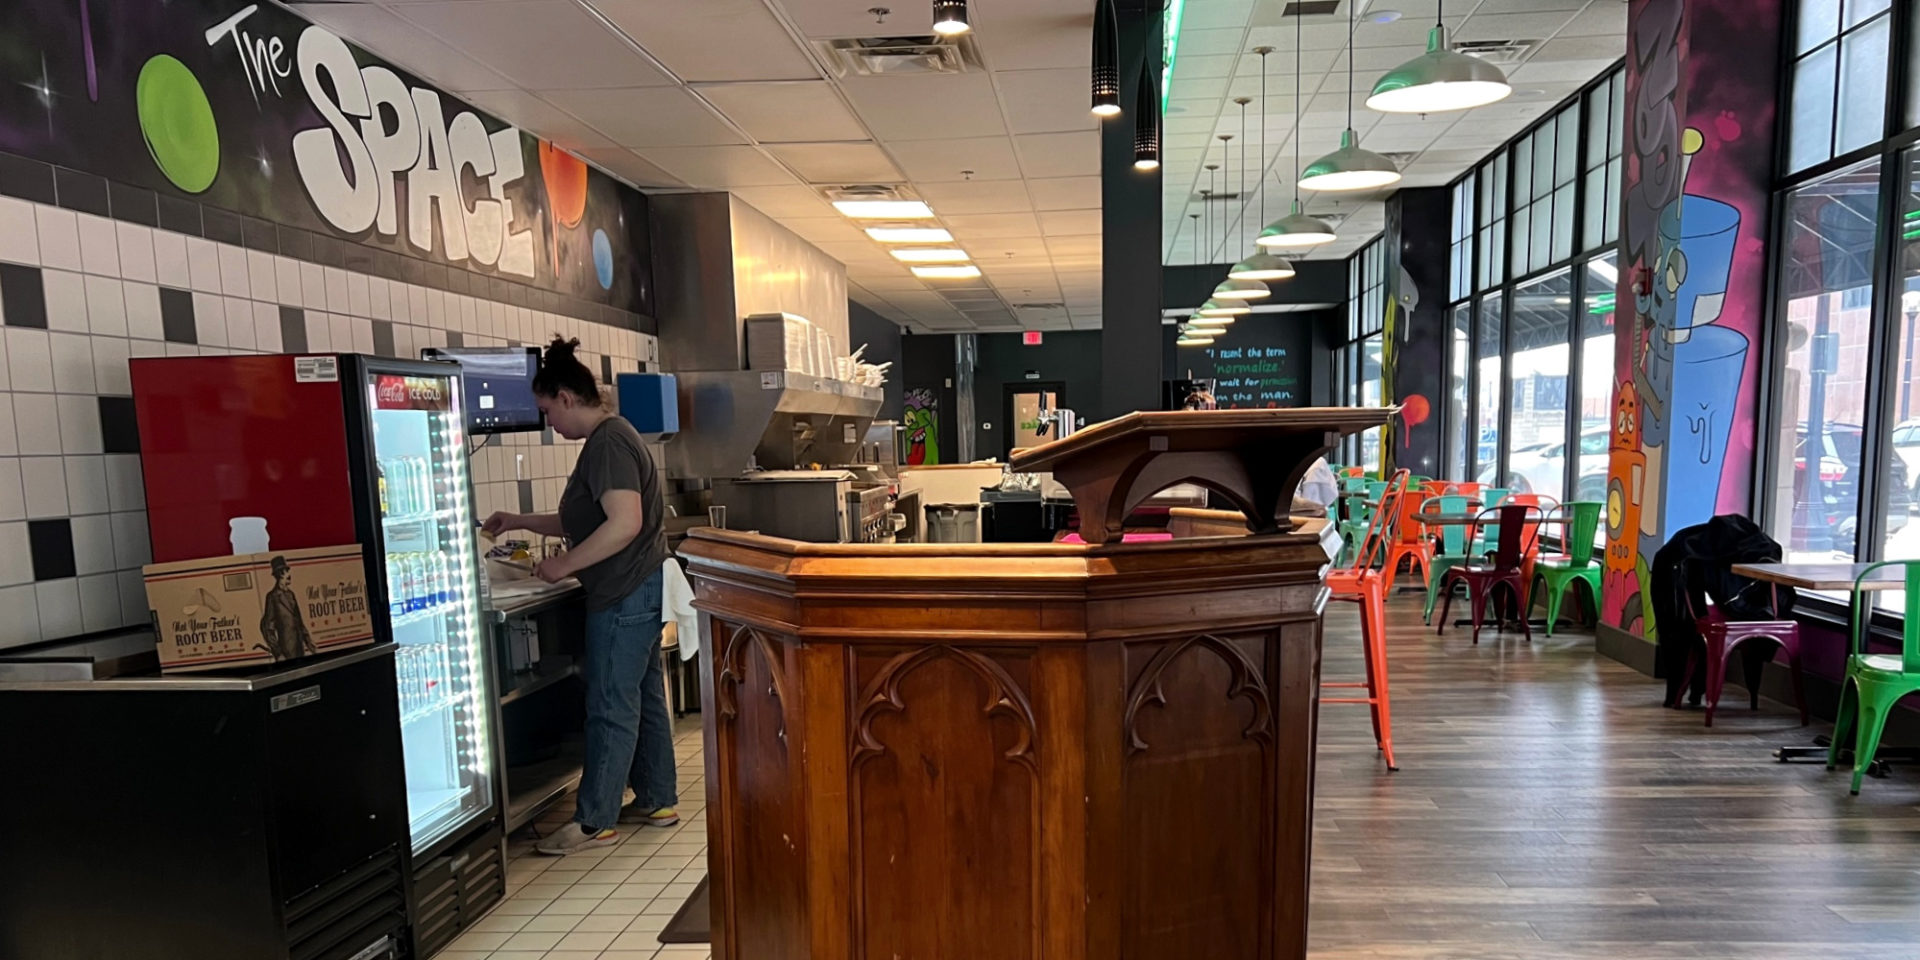 Inside The Space restaurant, new to Downtown Champaign. There is a wooden podium and a bar manager working at the counter. Chairs of bright orange and teal are tucked into brown tables and the bar. Photo by Alyssa Buckley.